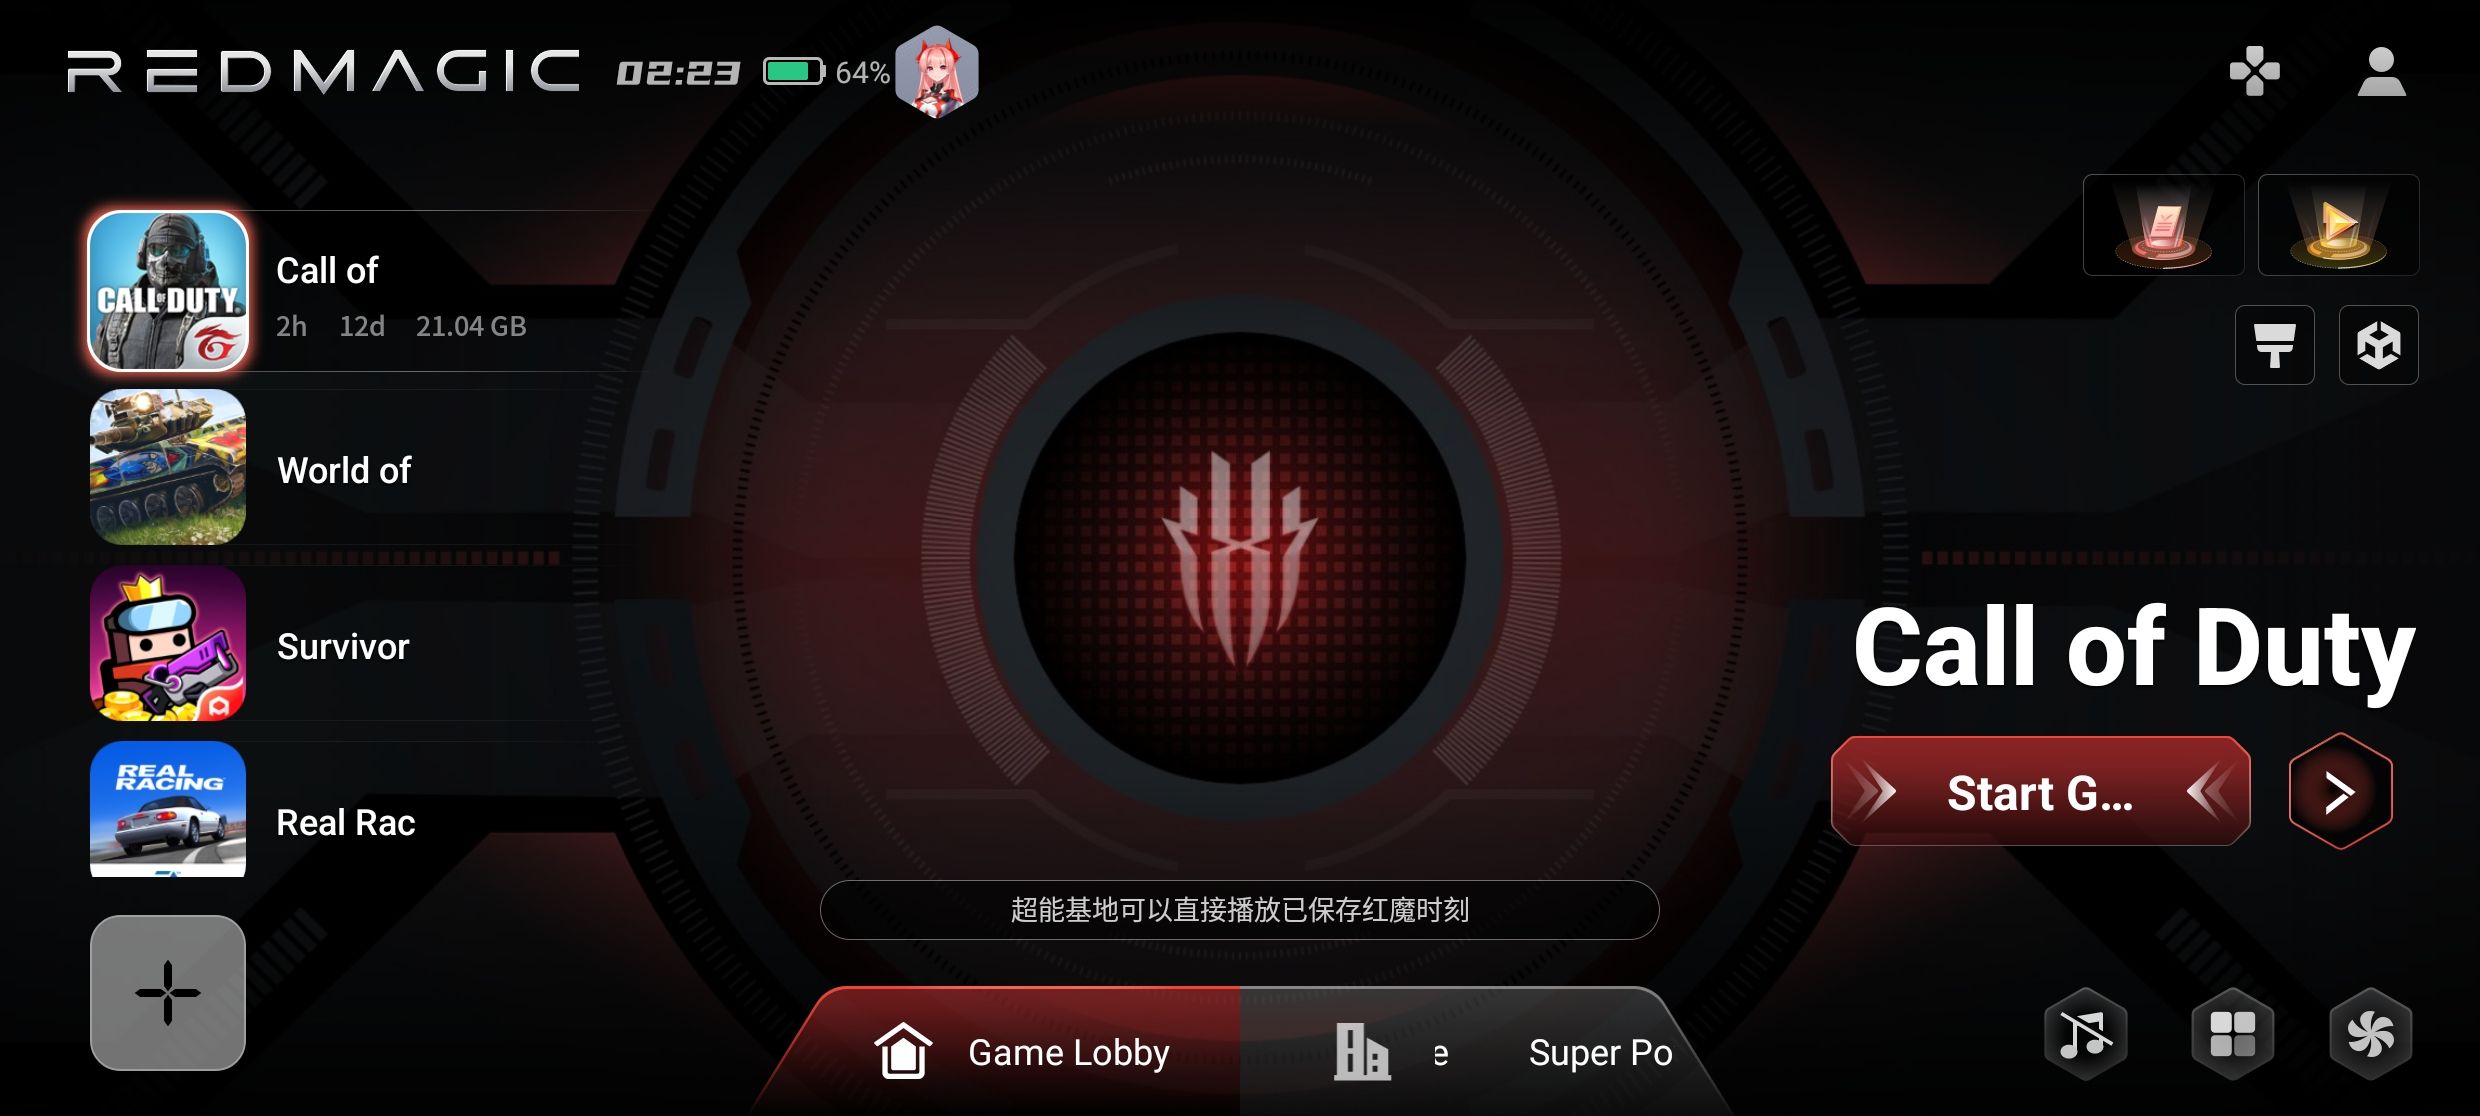 17 Redmagic 8 Pro Chinese Characters in the UI